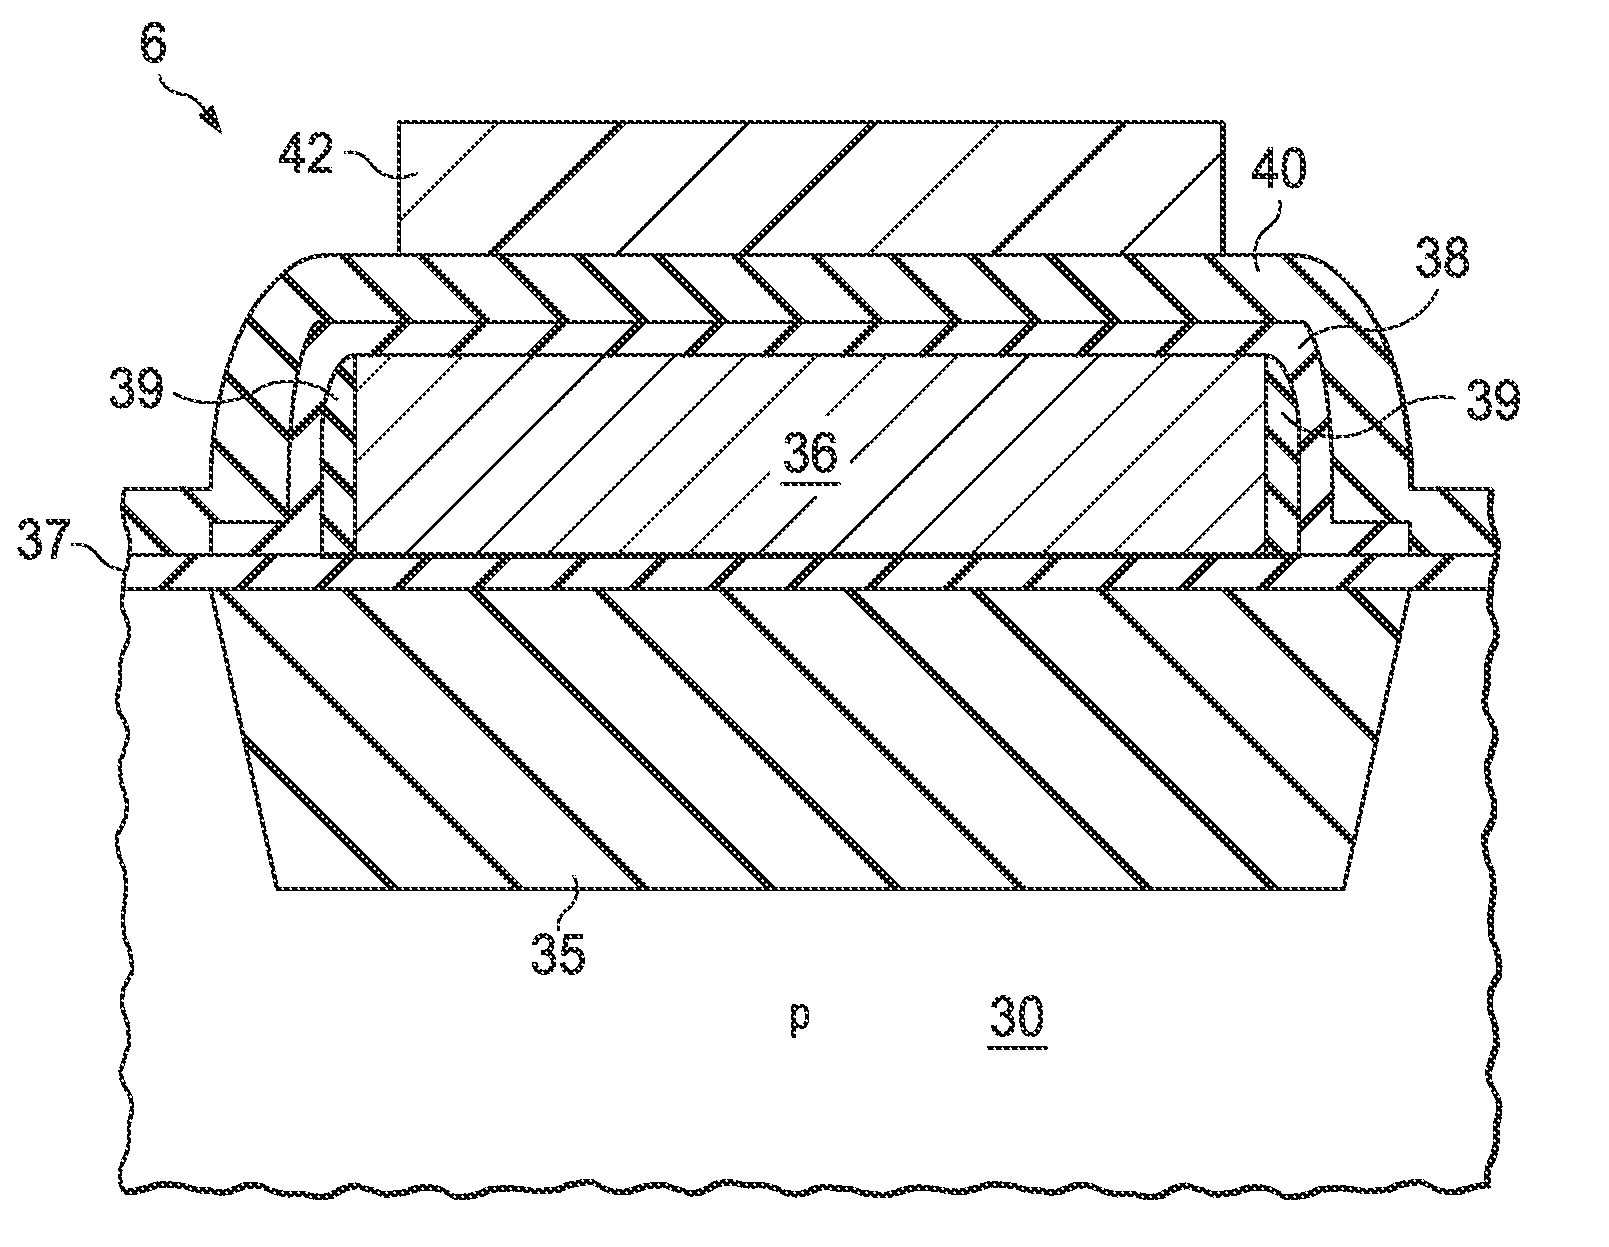 Low leakage capacitor for analog floating-gate integrated circuits